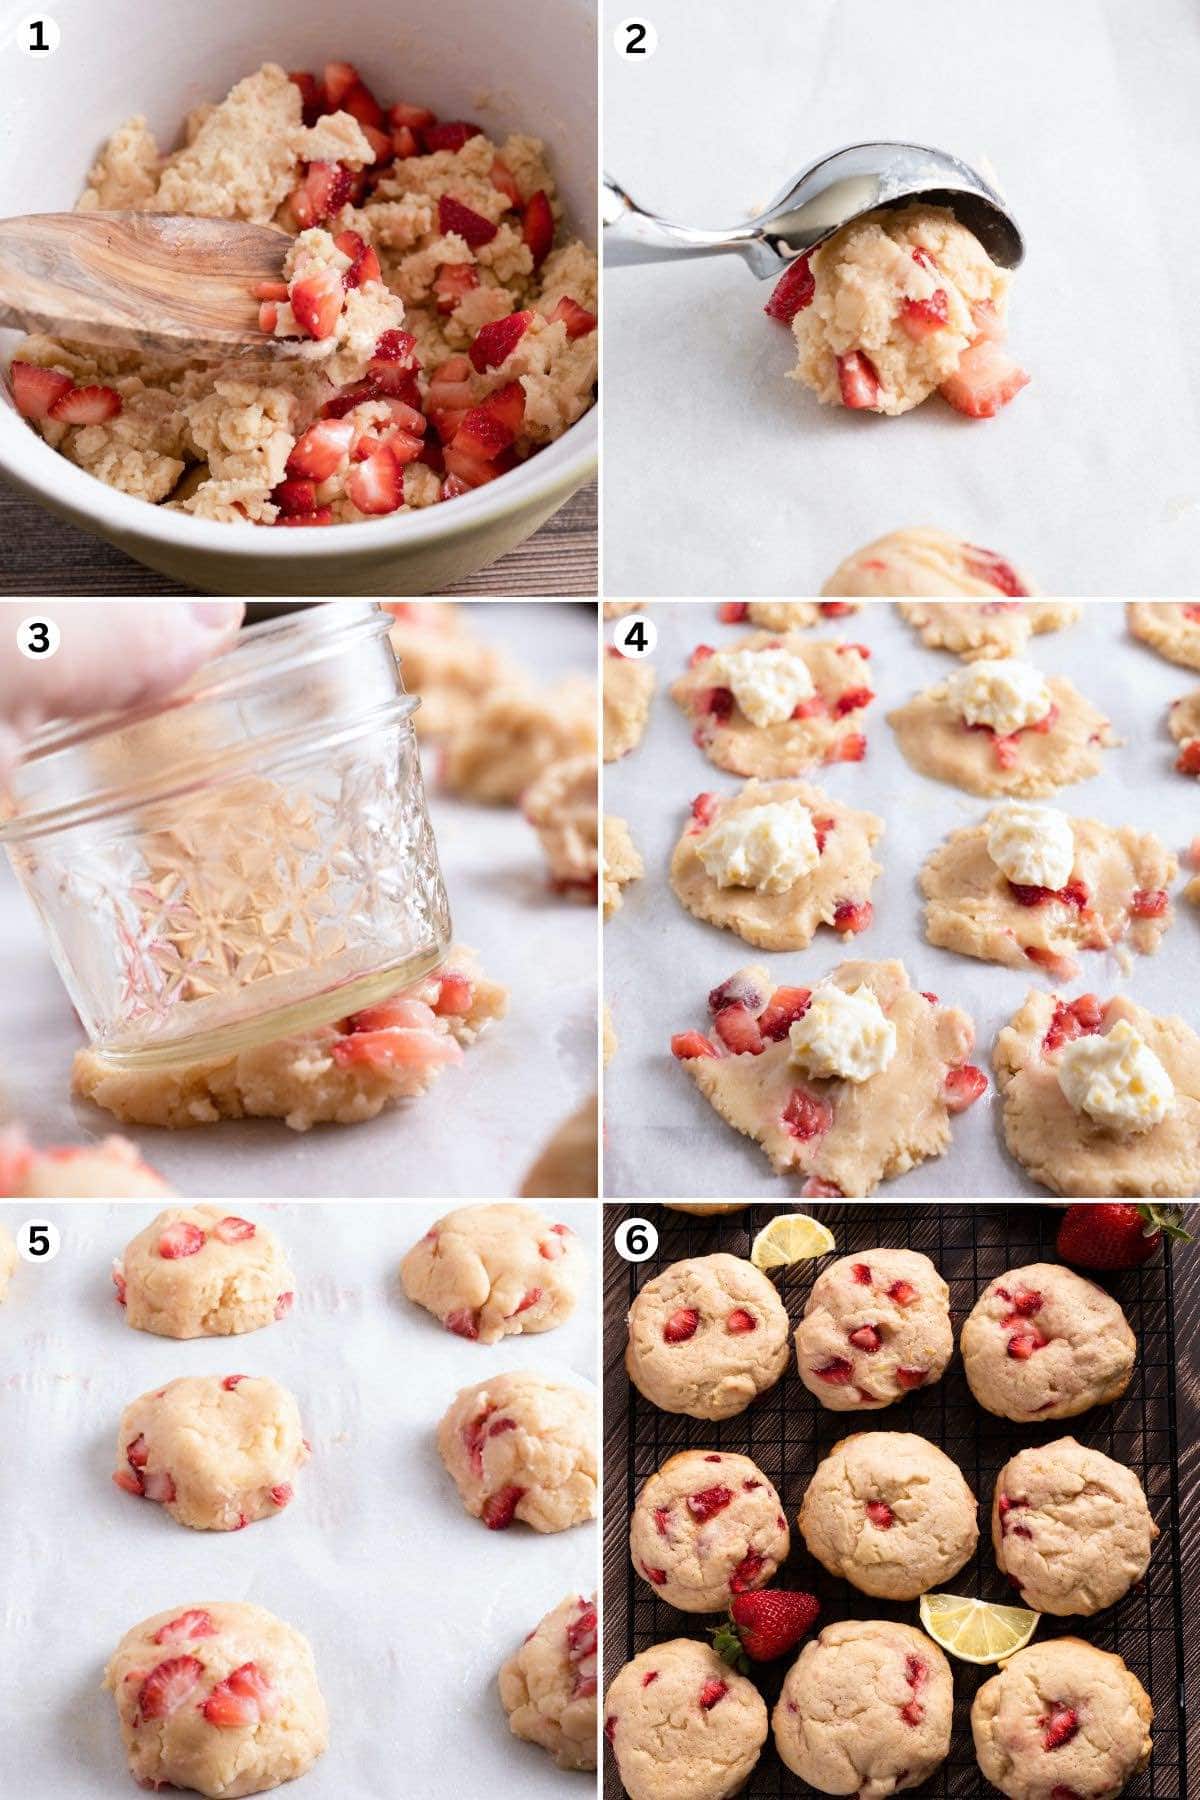 make the strawberry batter and scoop a small amount. Flatten the dough. place cream cheese dough balls on top. cover with another strawberry batter and roll in a ball. Bake.